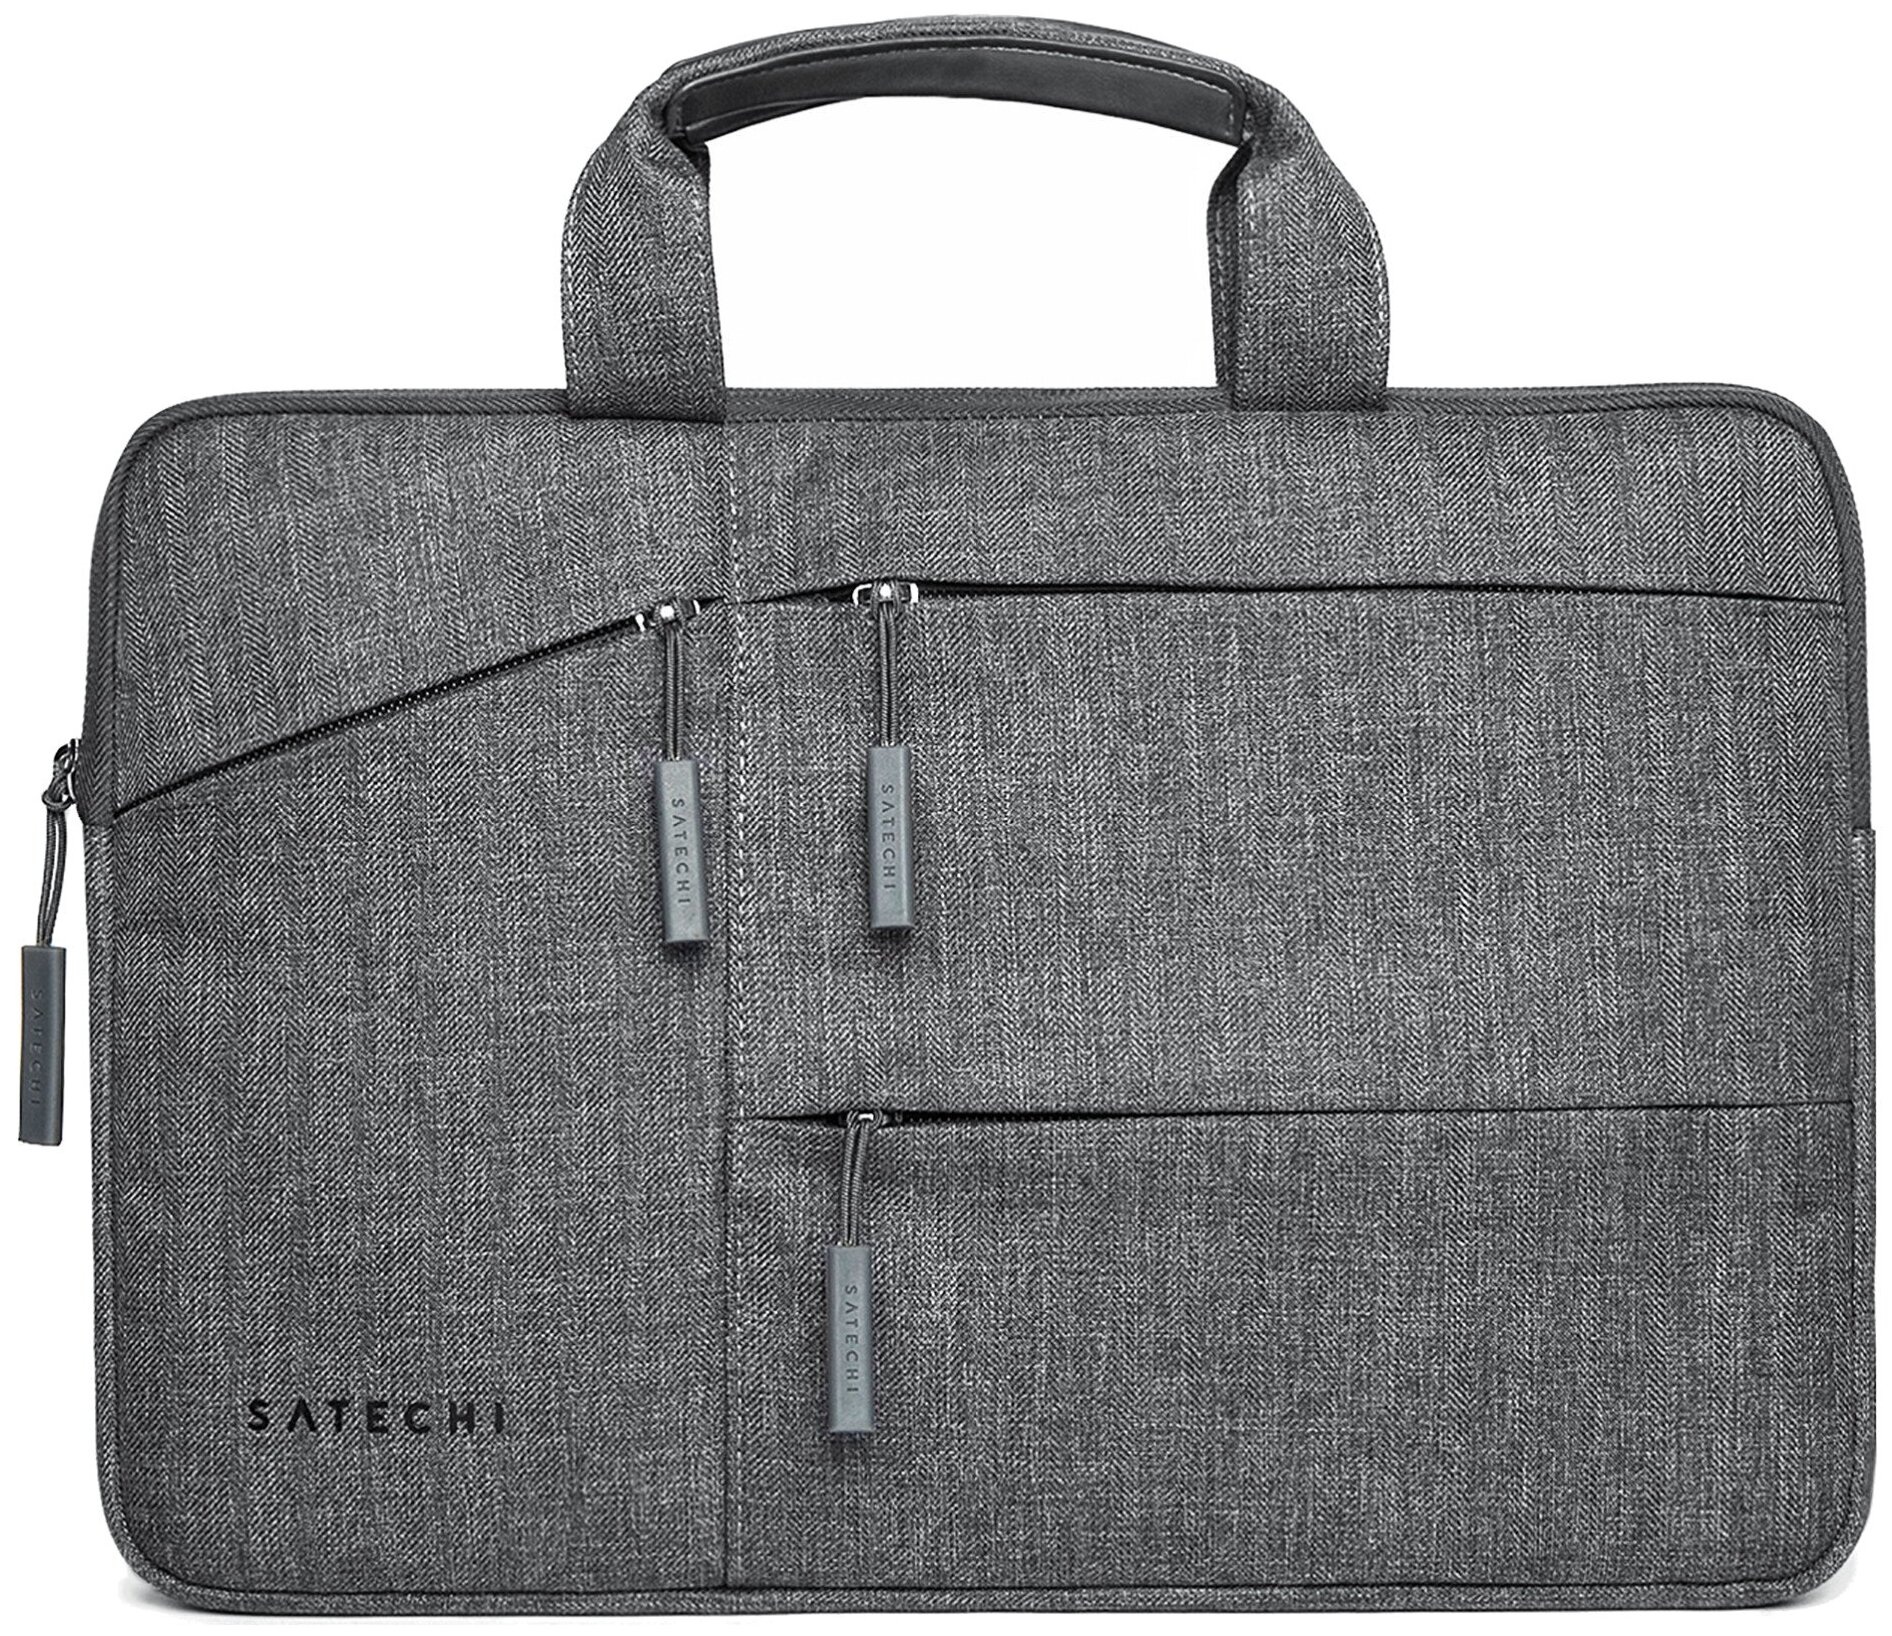 Сумка Satechi Water-Resistant Laptop Carrying Case with Pockets 15-16" gray